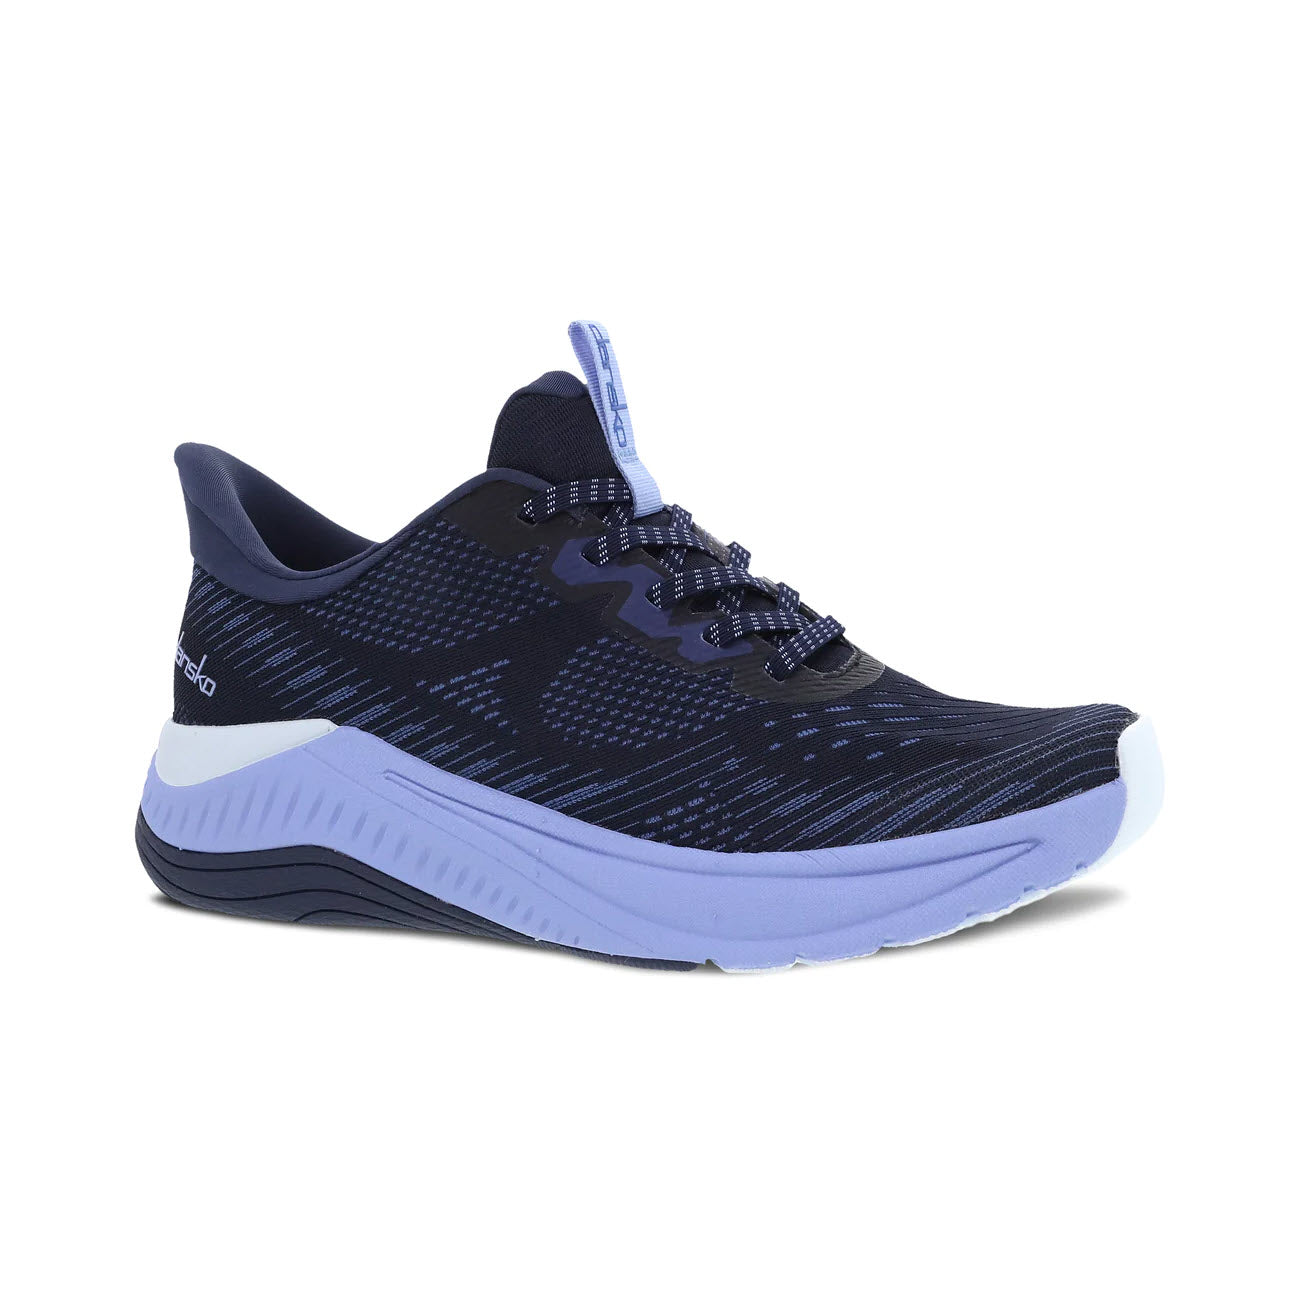 A single black and blue athletic walking sneaker with a white sole and lace-up closure, featuring Dansko Natural Arch Plus technology for enhanced arch support, displayed against a white background.